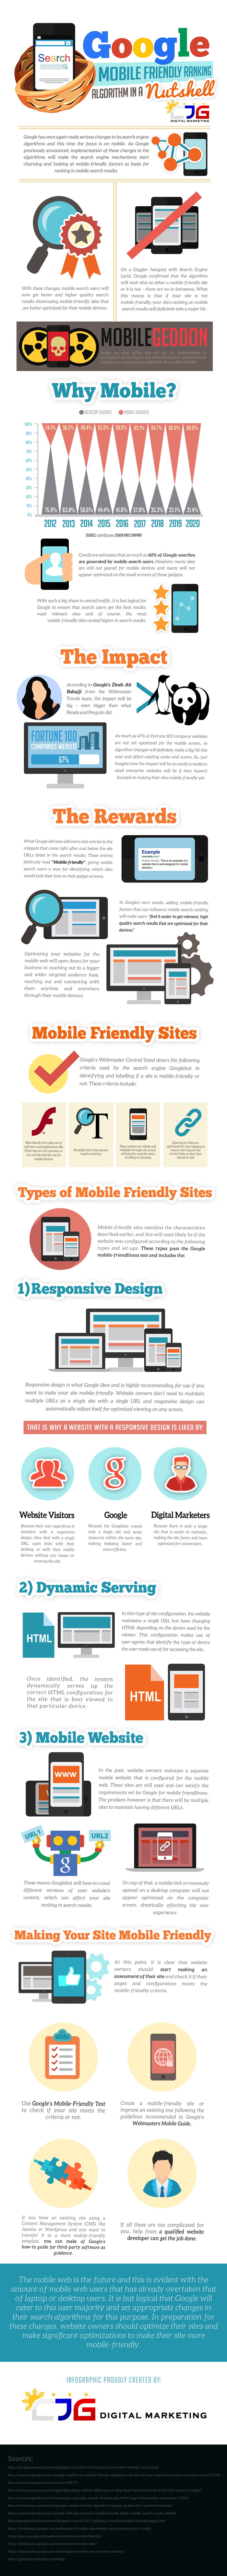 Google Mobile Friendly Ranking Algorithm in a Nutshell (Infographic) - An Infographic from CJG Digital Marketing